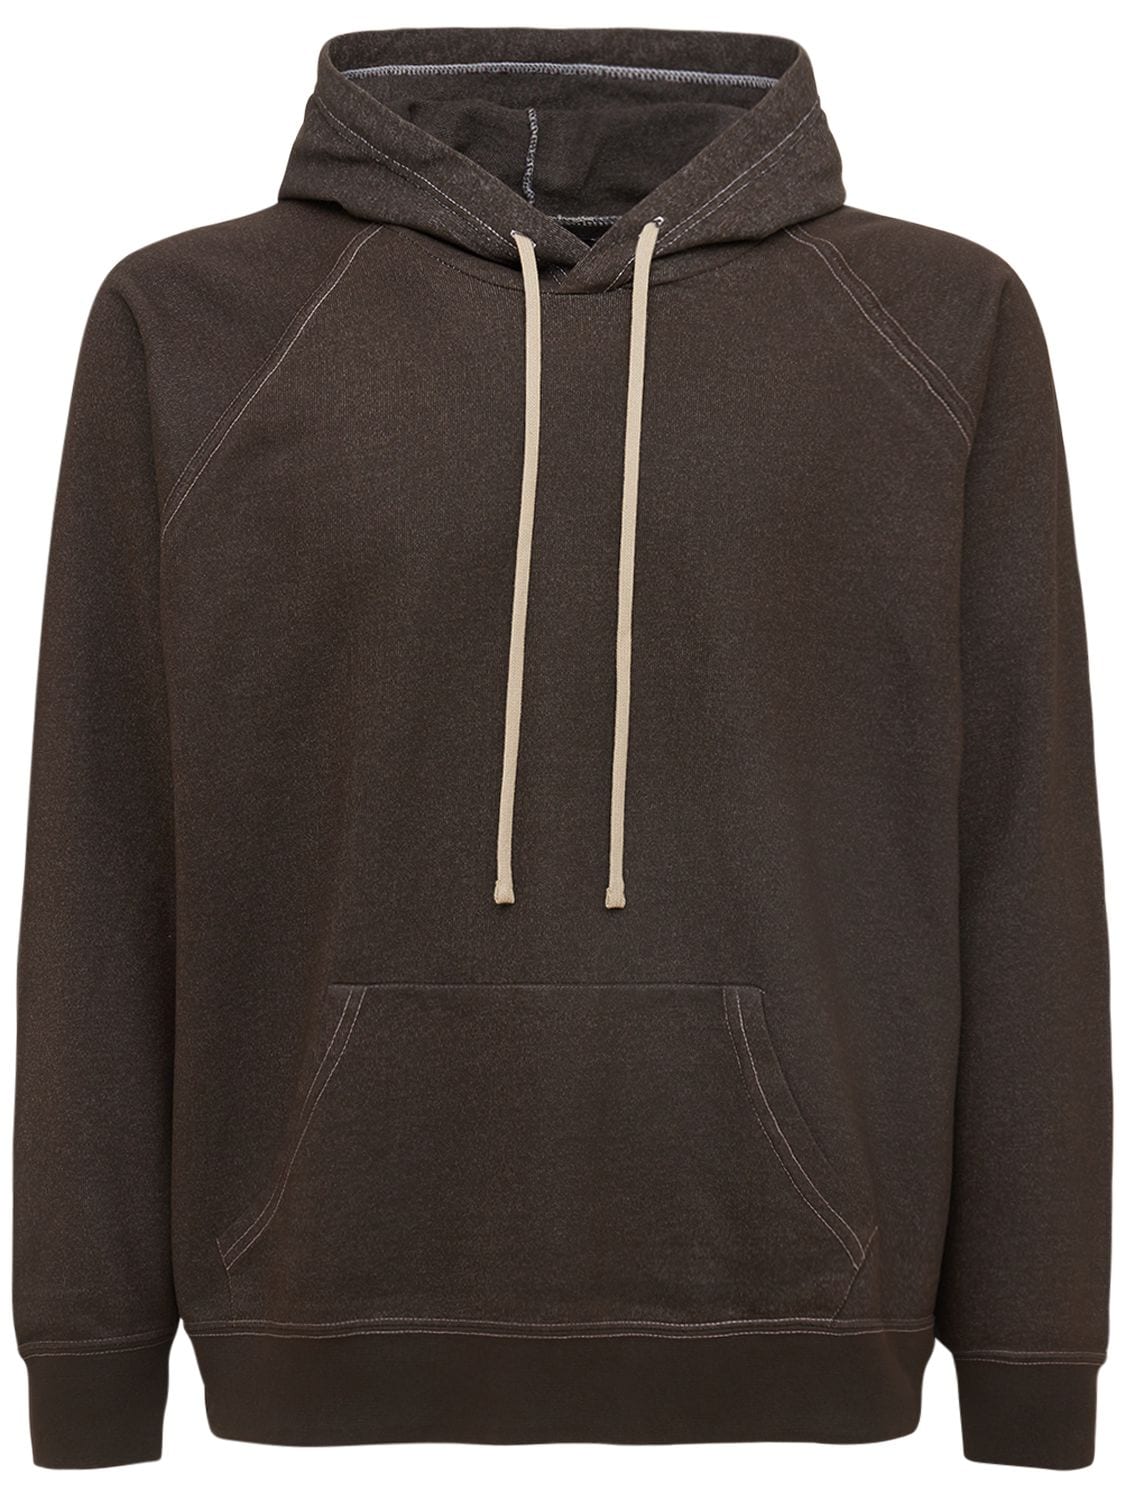 Mille900quindici Waxed Cotton Blend Logo Hoodie In Brown